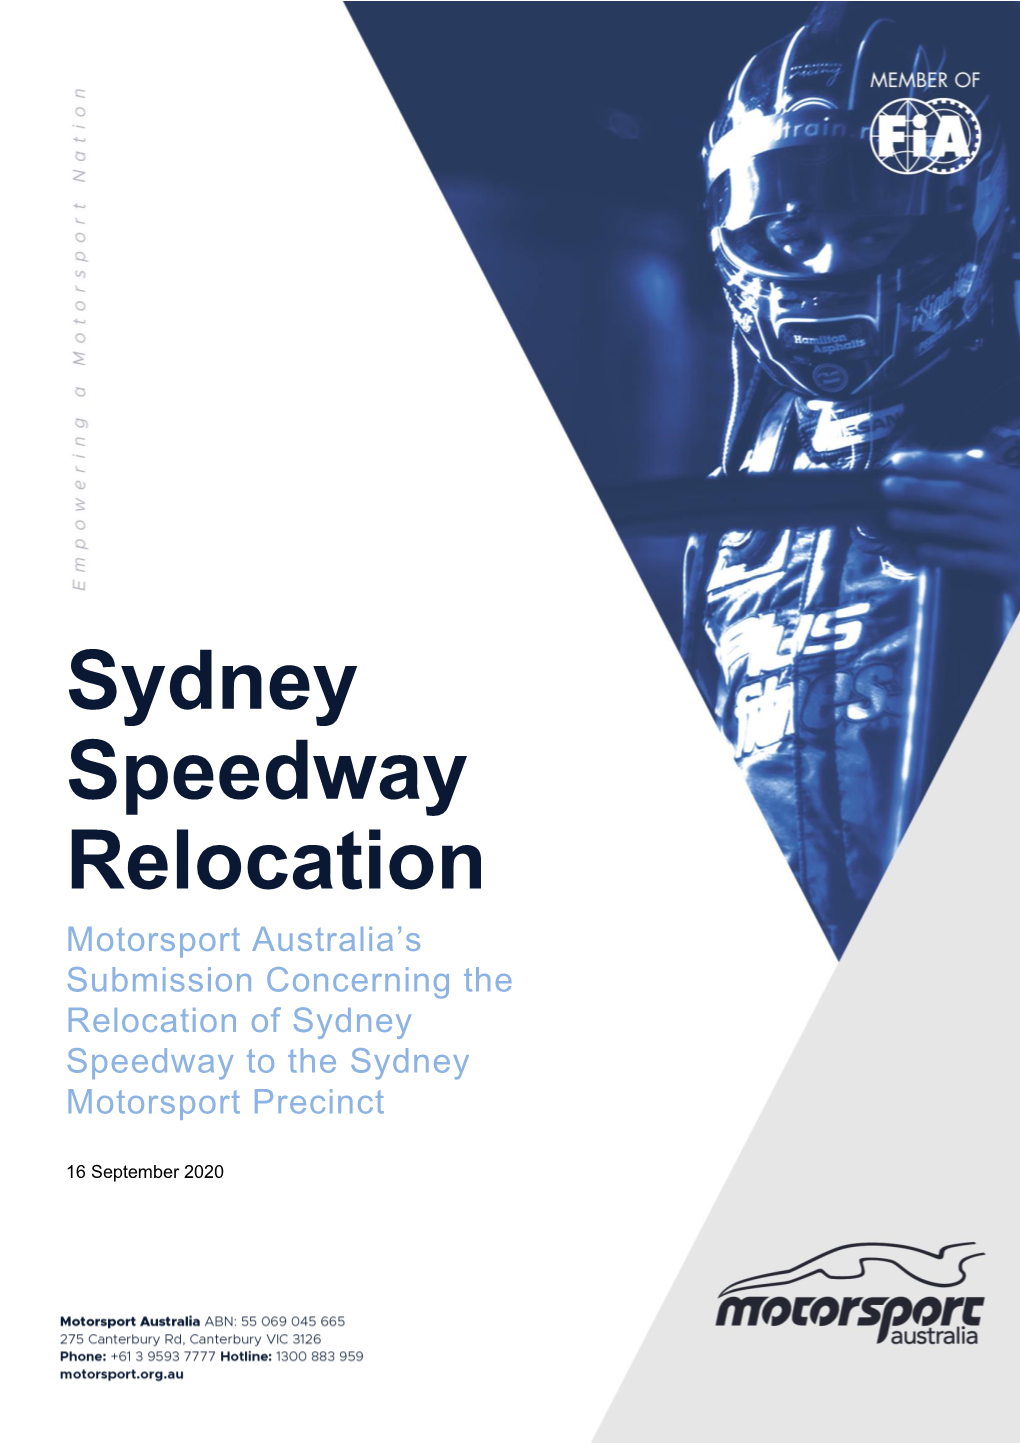 Sydney Speedway Relocation Motorsport Australia’S Submission Concerning the Relocation of Sydney Speedway to the Sydney Motorsport Precinct